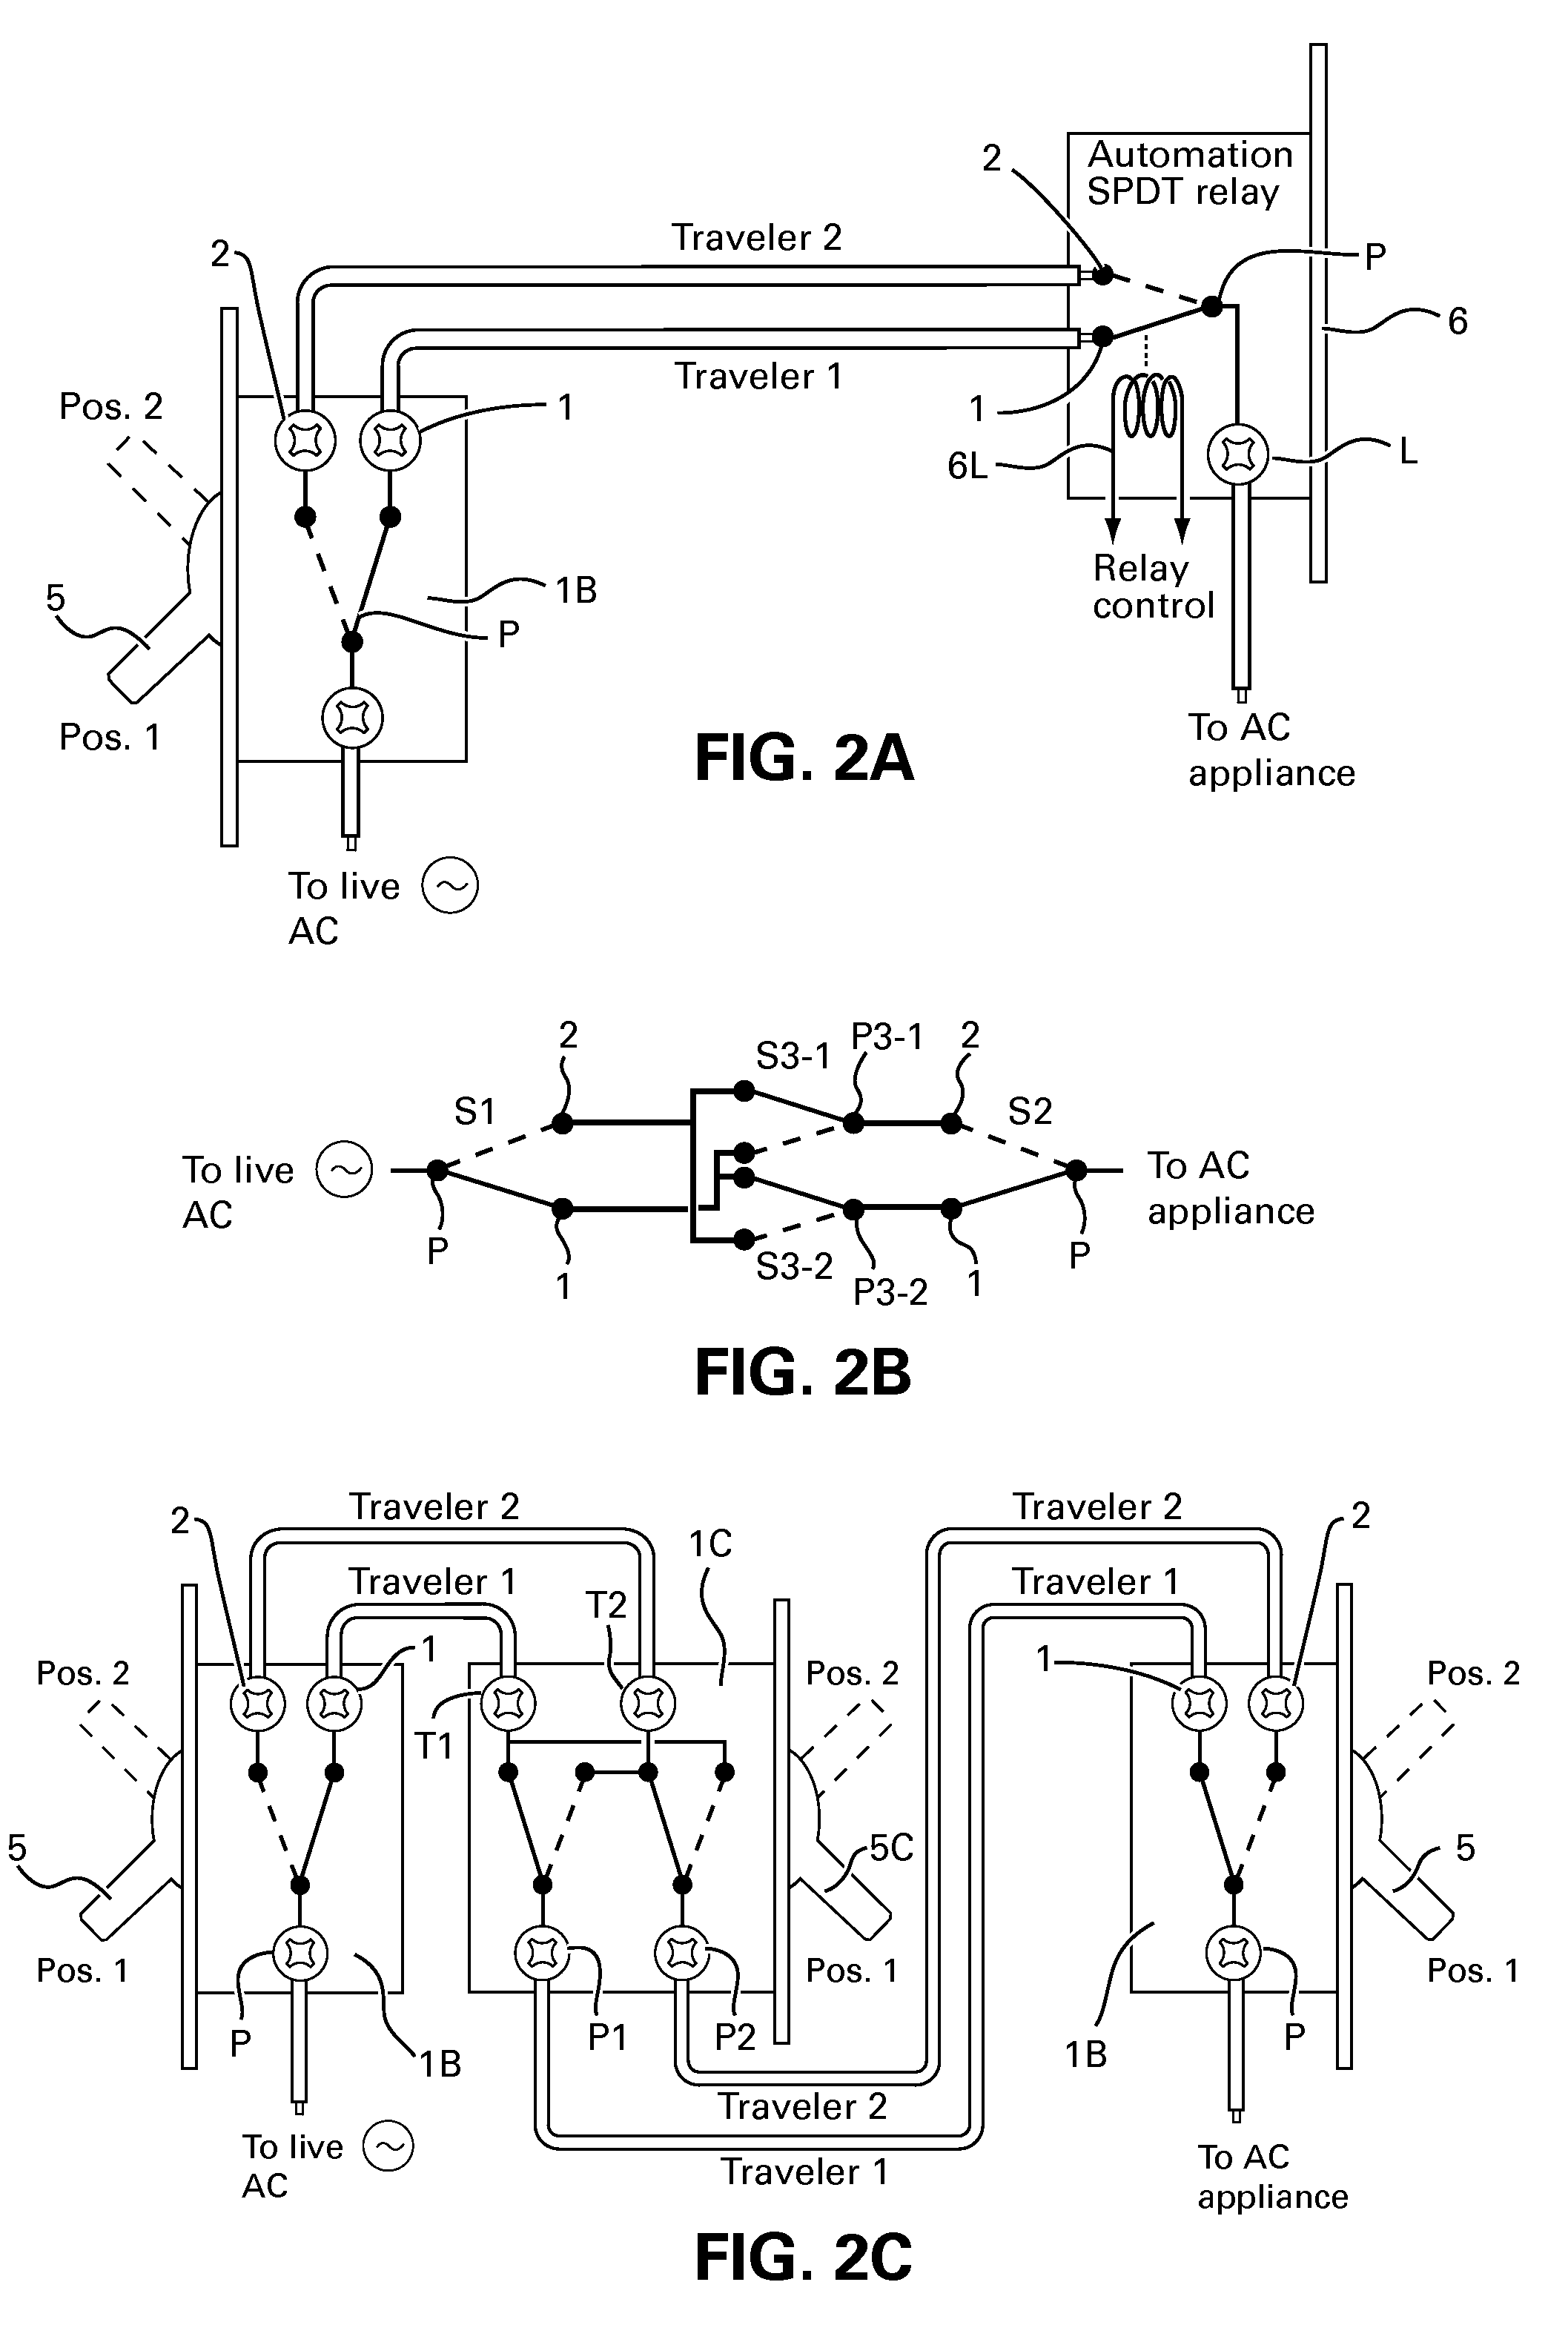 Method and apparatus for remotely operating AC powered appliances from video interphones or shopping terminals